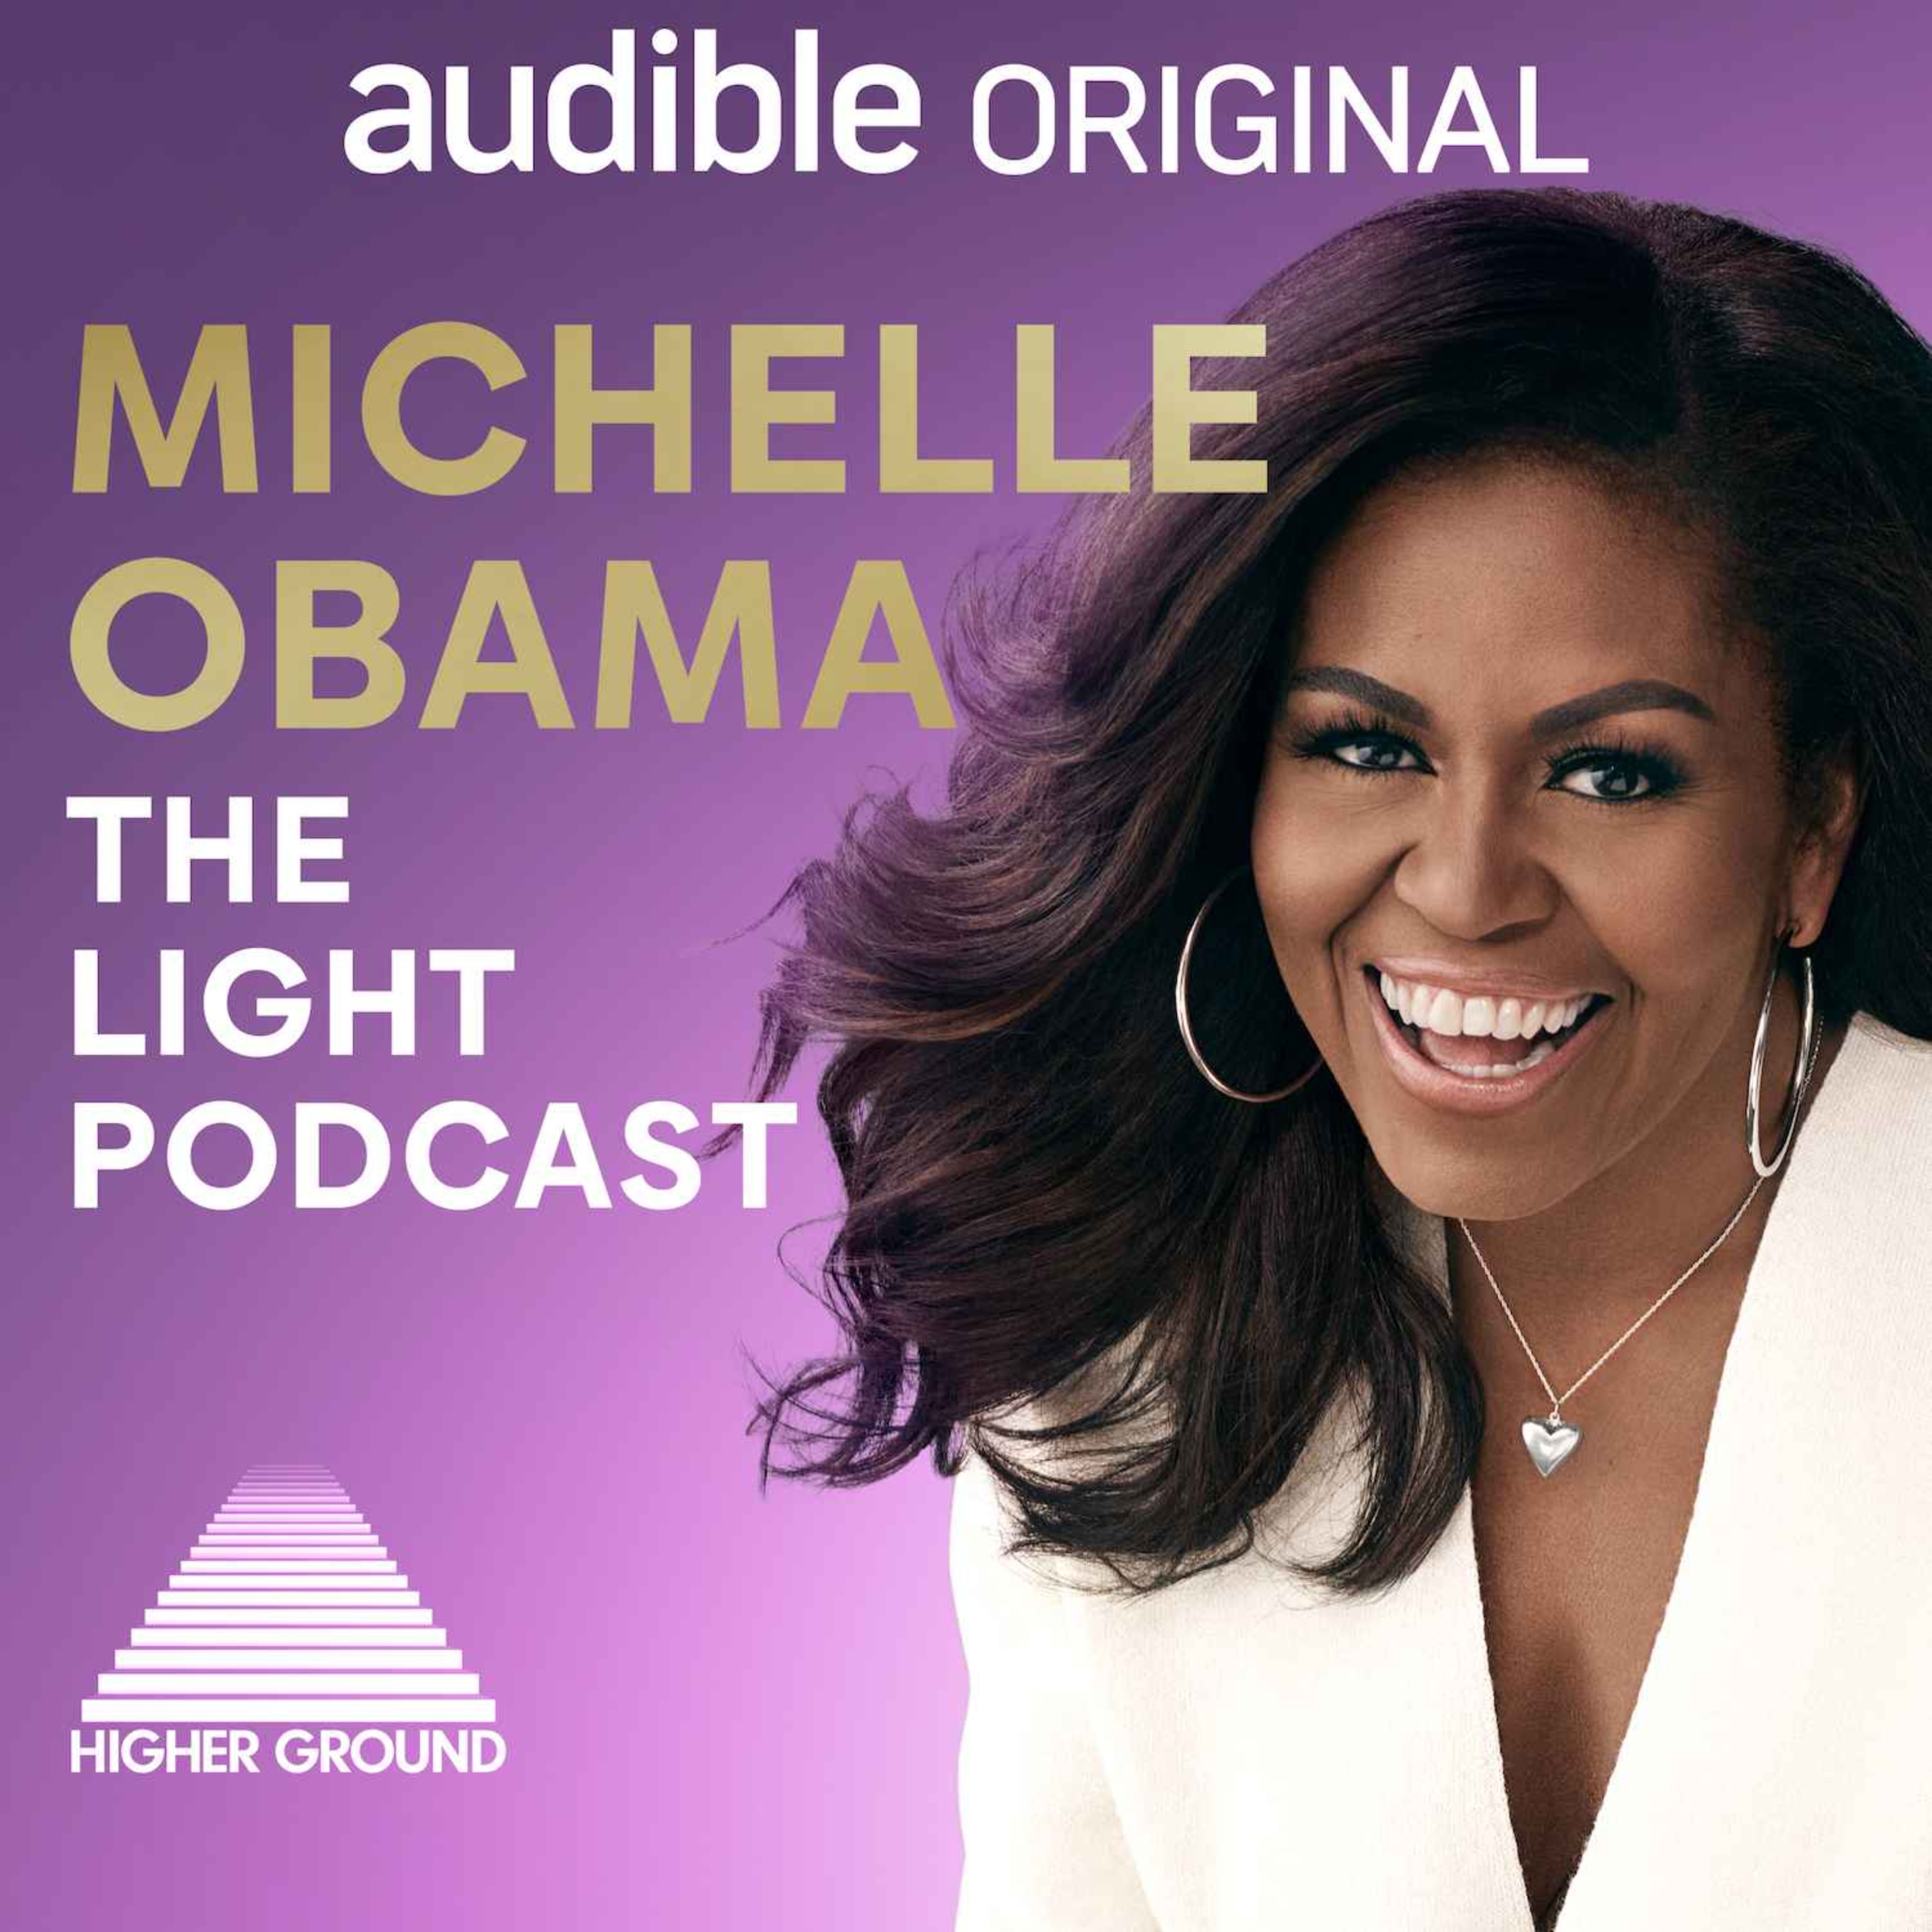 Introducing Michelle Obama: The Light Podcast by Michelle Obama